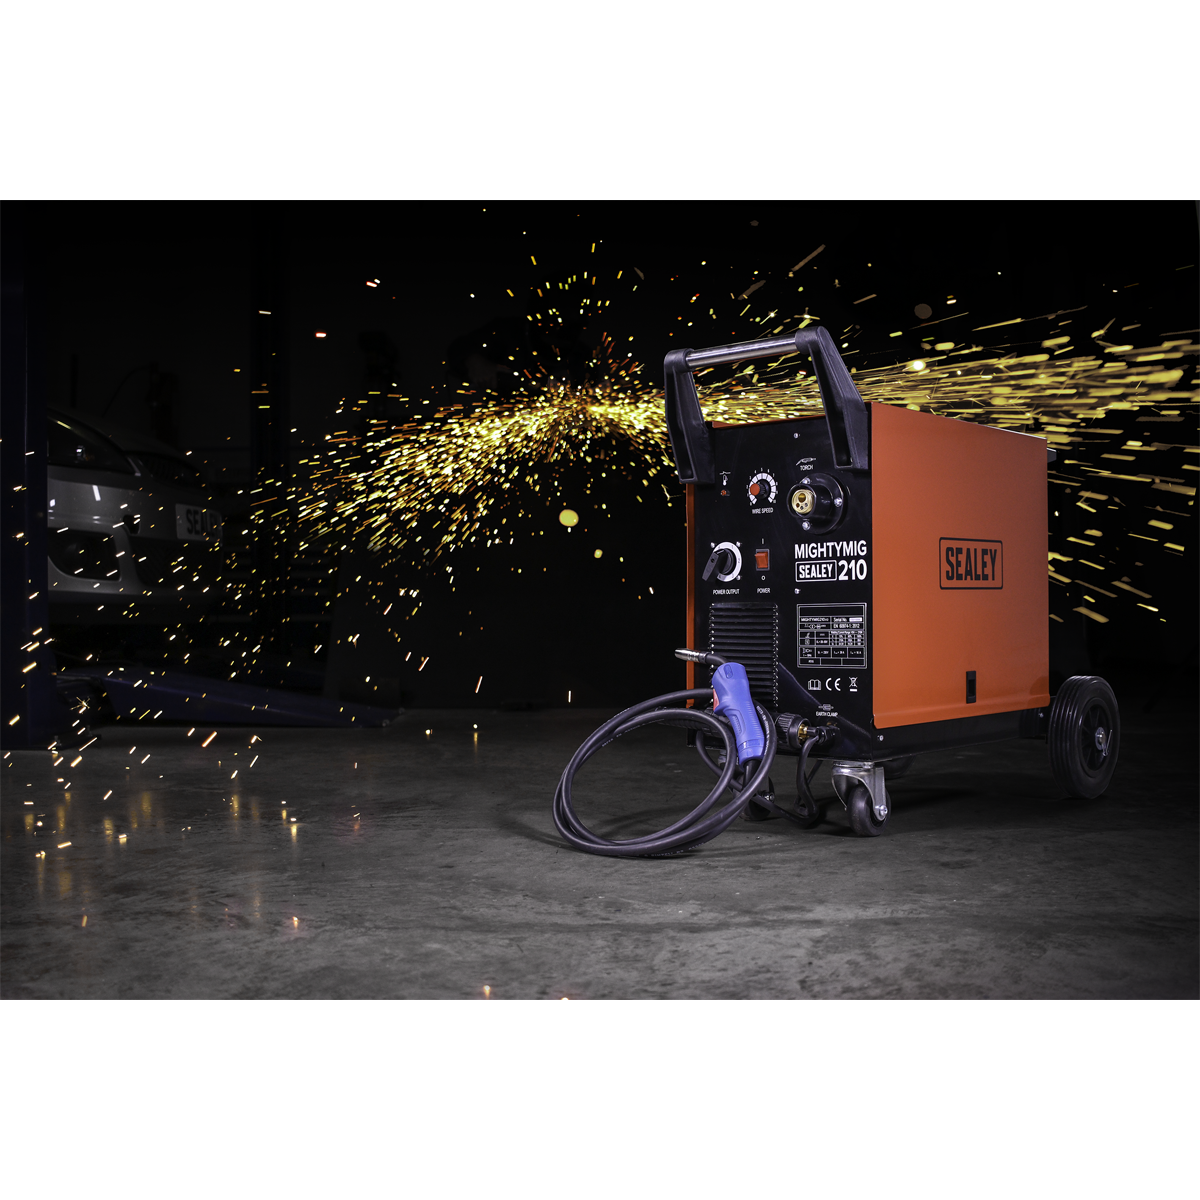 Professional Gas/No-Gas MIG Welder 210A with Euro Torch